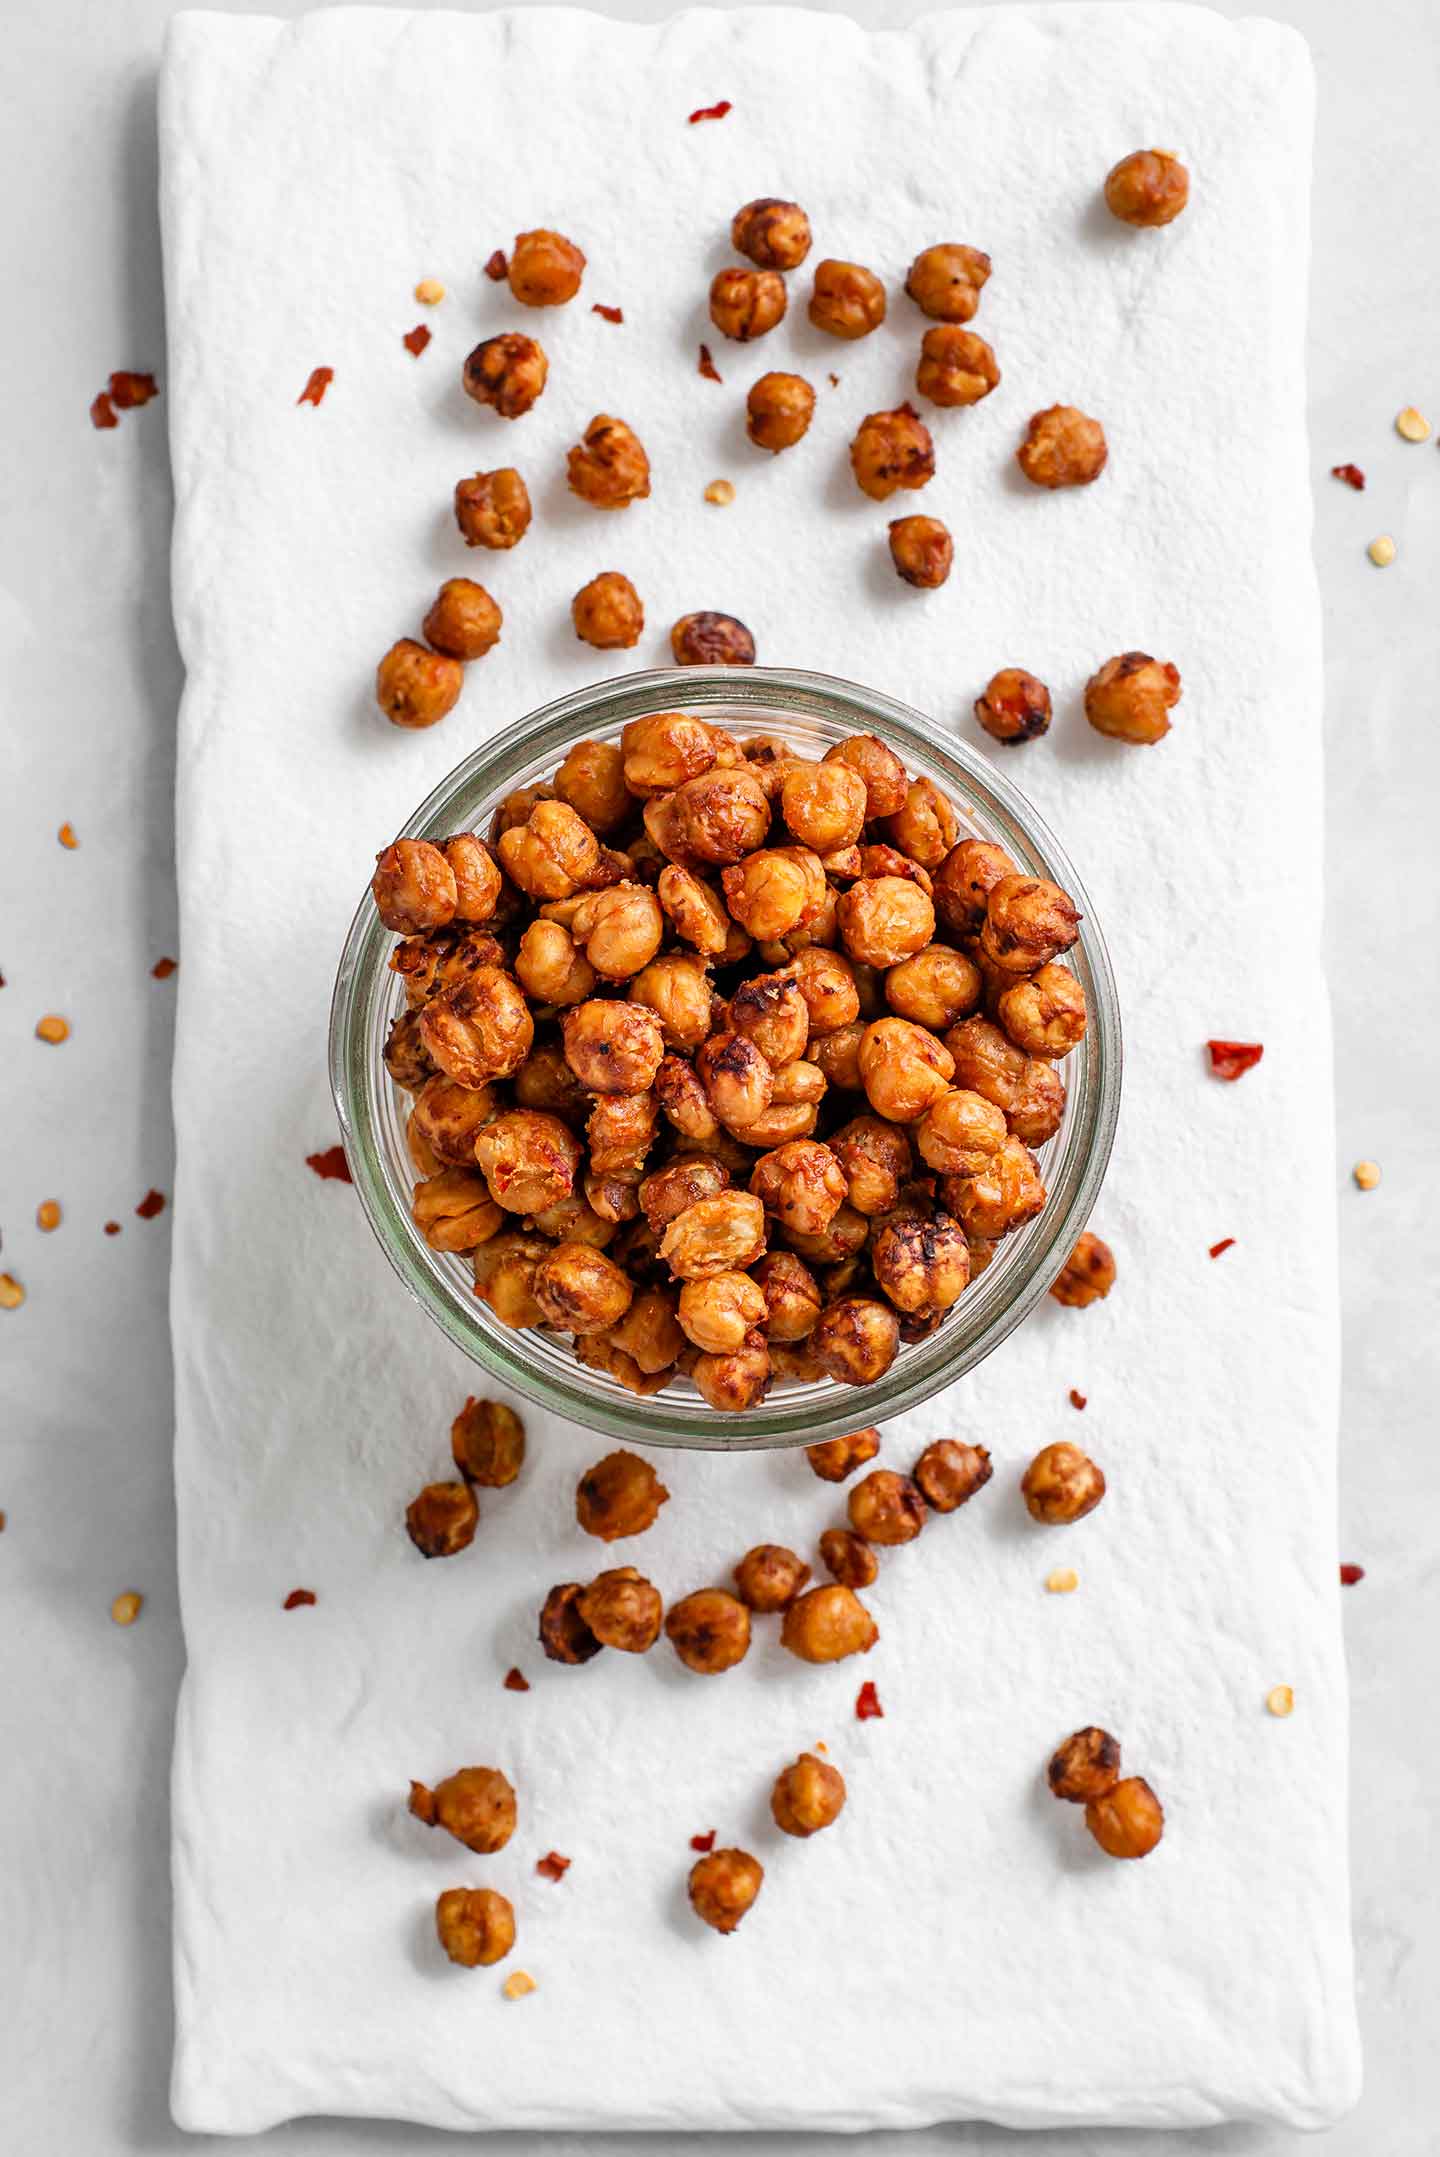 Top down view of chilli miso roasted chickpeas in a glass jar. Roasted chickpeas are scattered around the jar on a white tray.